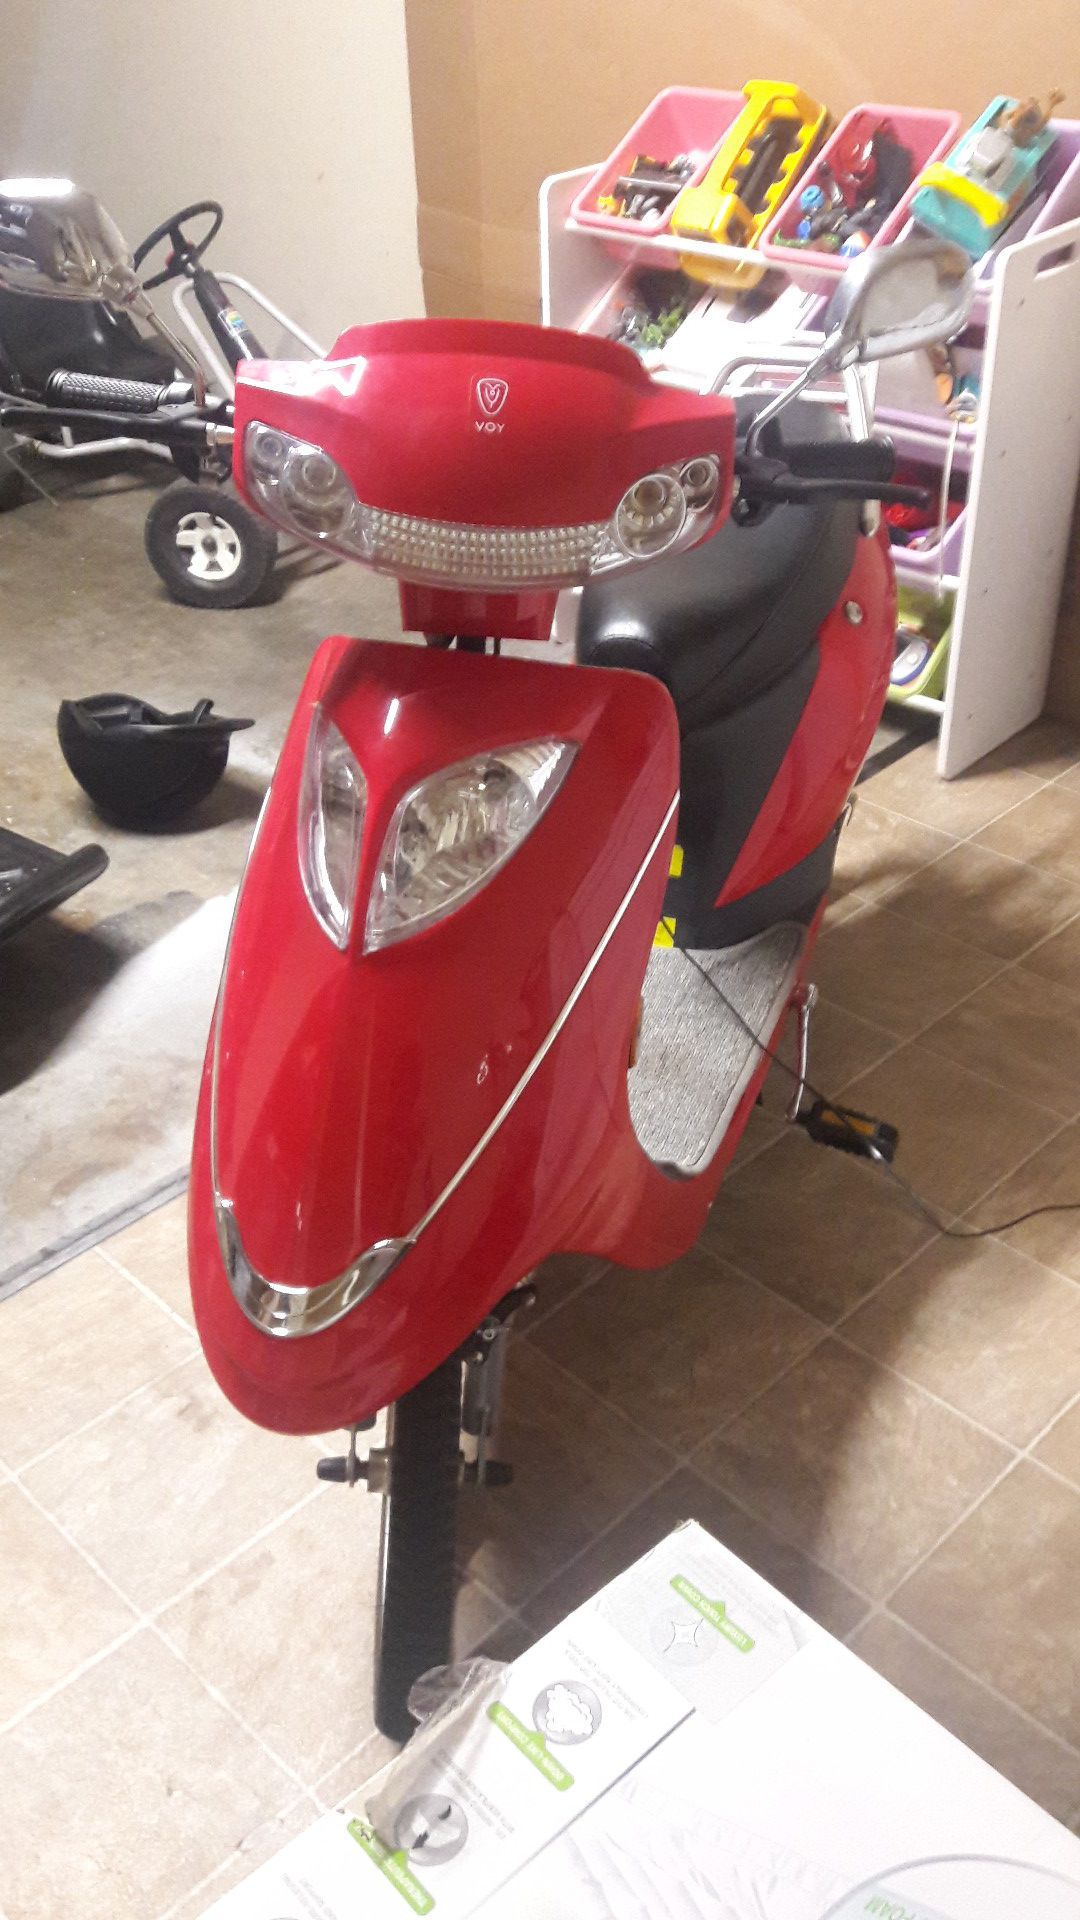 2004 voy electric scooter Sale in WA OfferUp